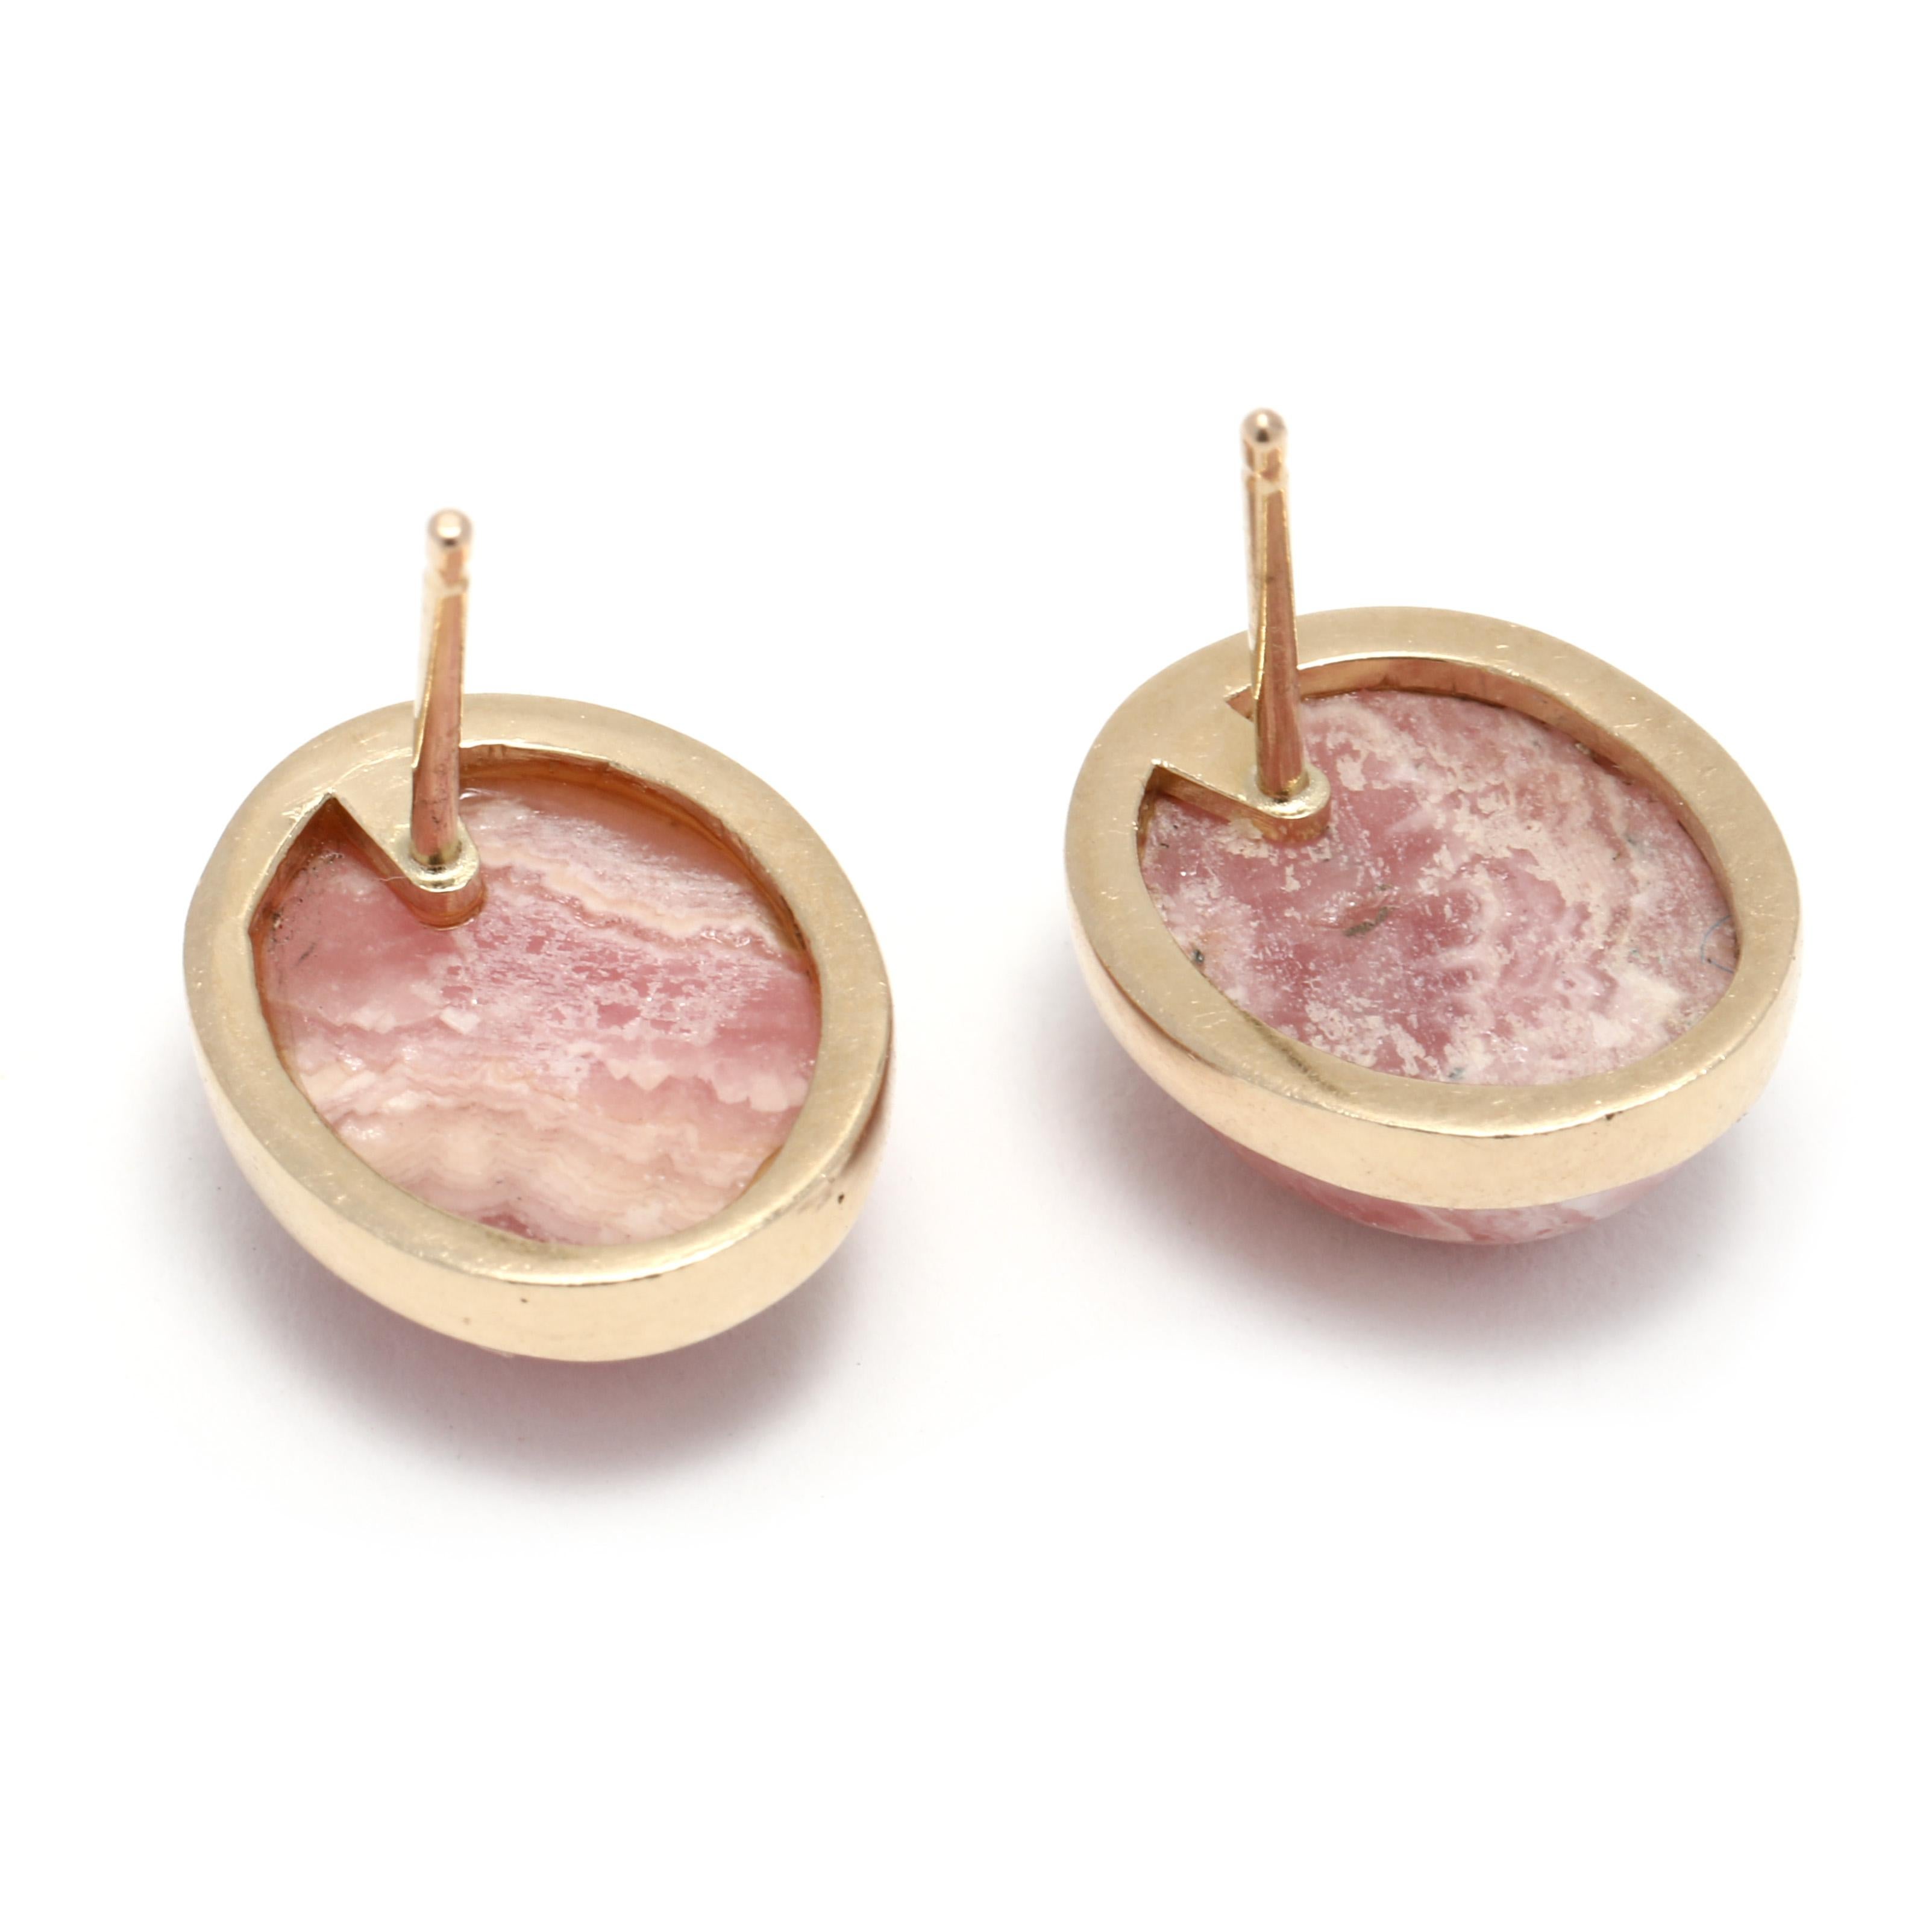 These beautiful 9ctw Rhodochrosite stud earrings are the perfect way to add a touch of glamour to any outfit. Crafted from 14K yellow gold, the earrings feature two pink rhodochrosite stones, each measuring 0.5 inches in length. These stunning studs